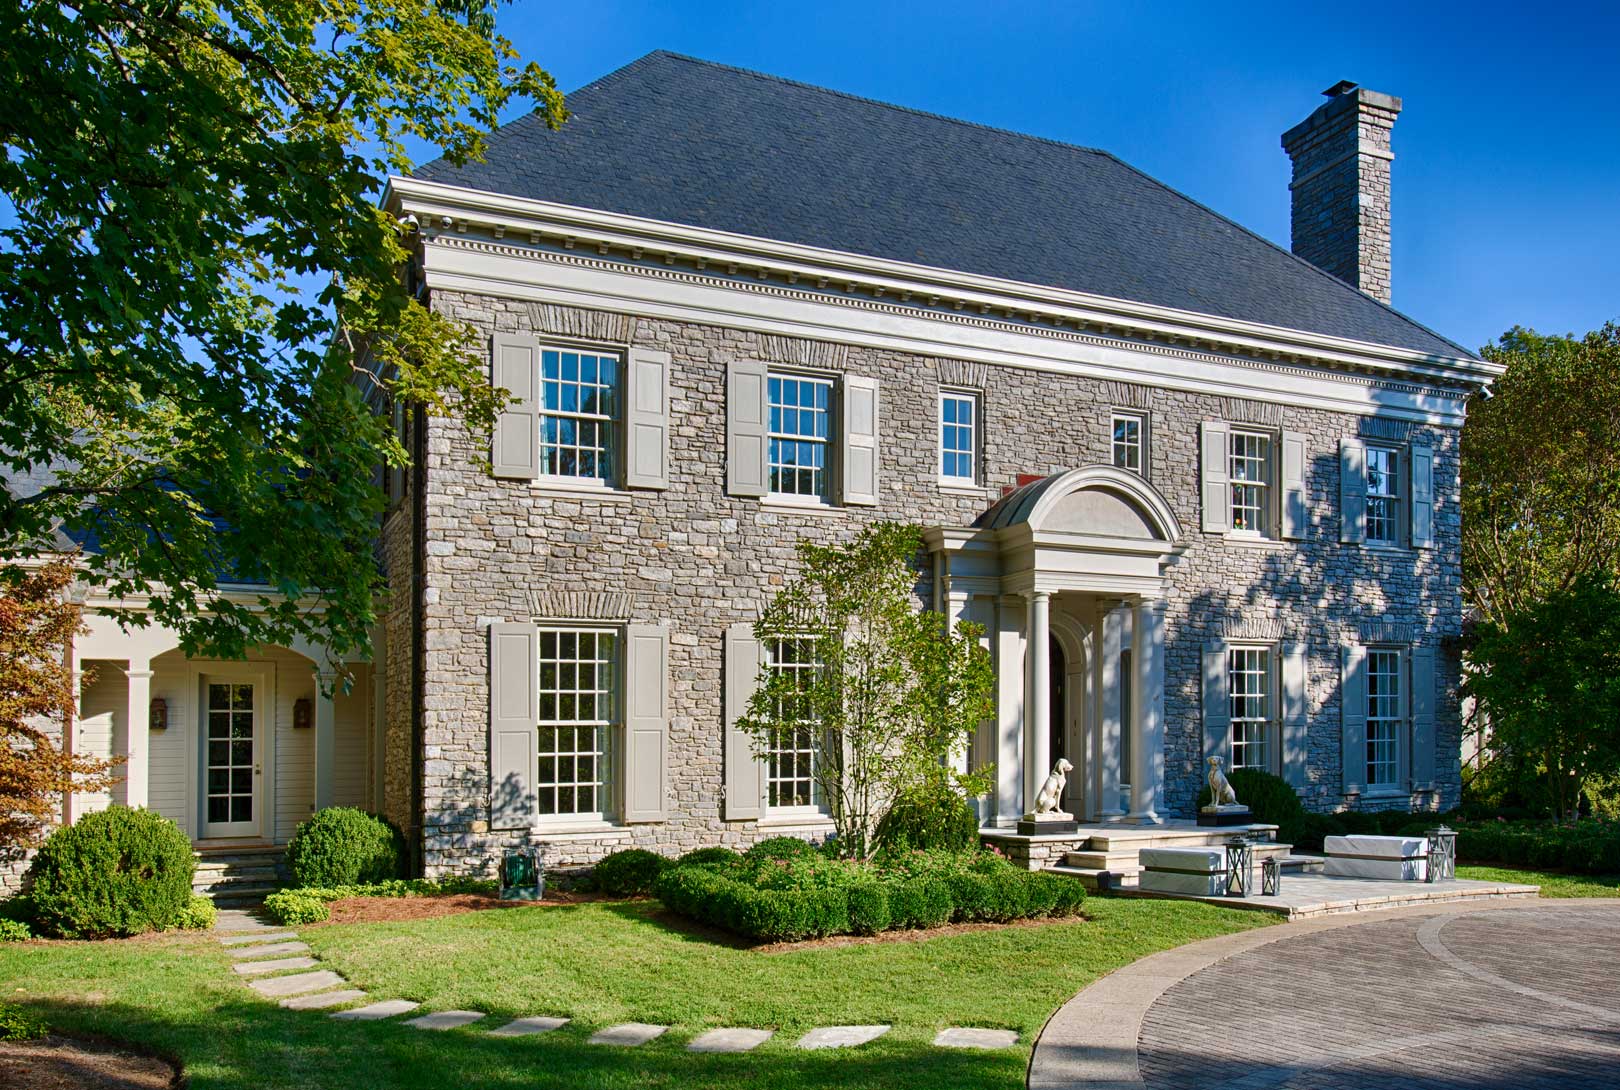 The Front Of A Two-Story Stone Home Renovation In Tennessee